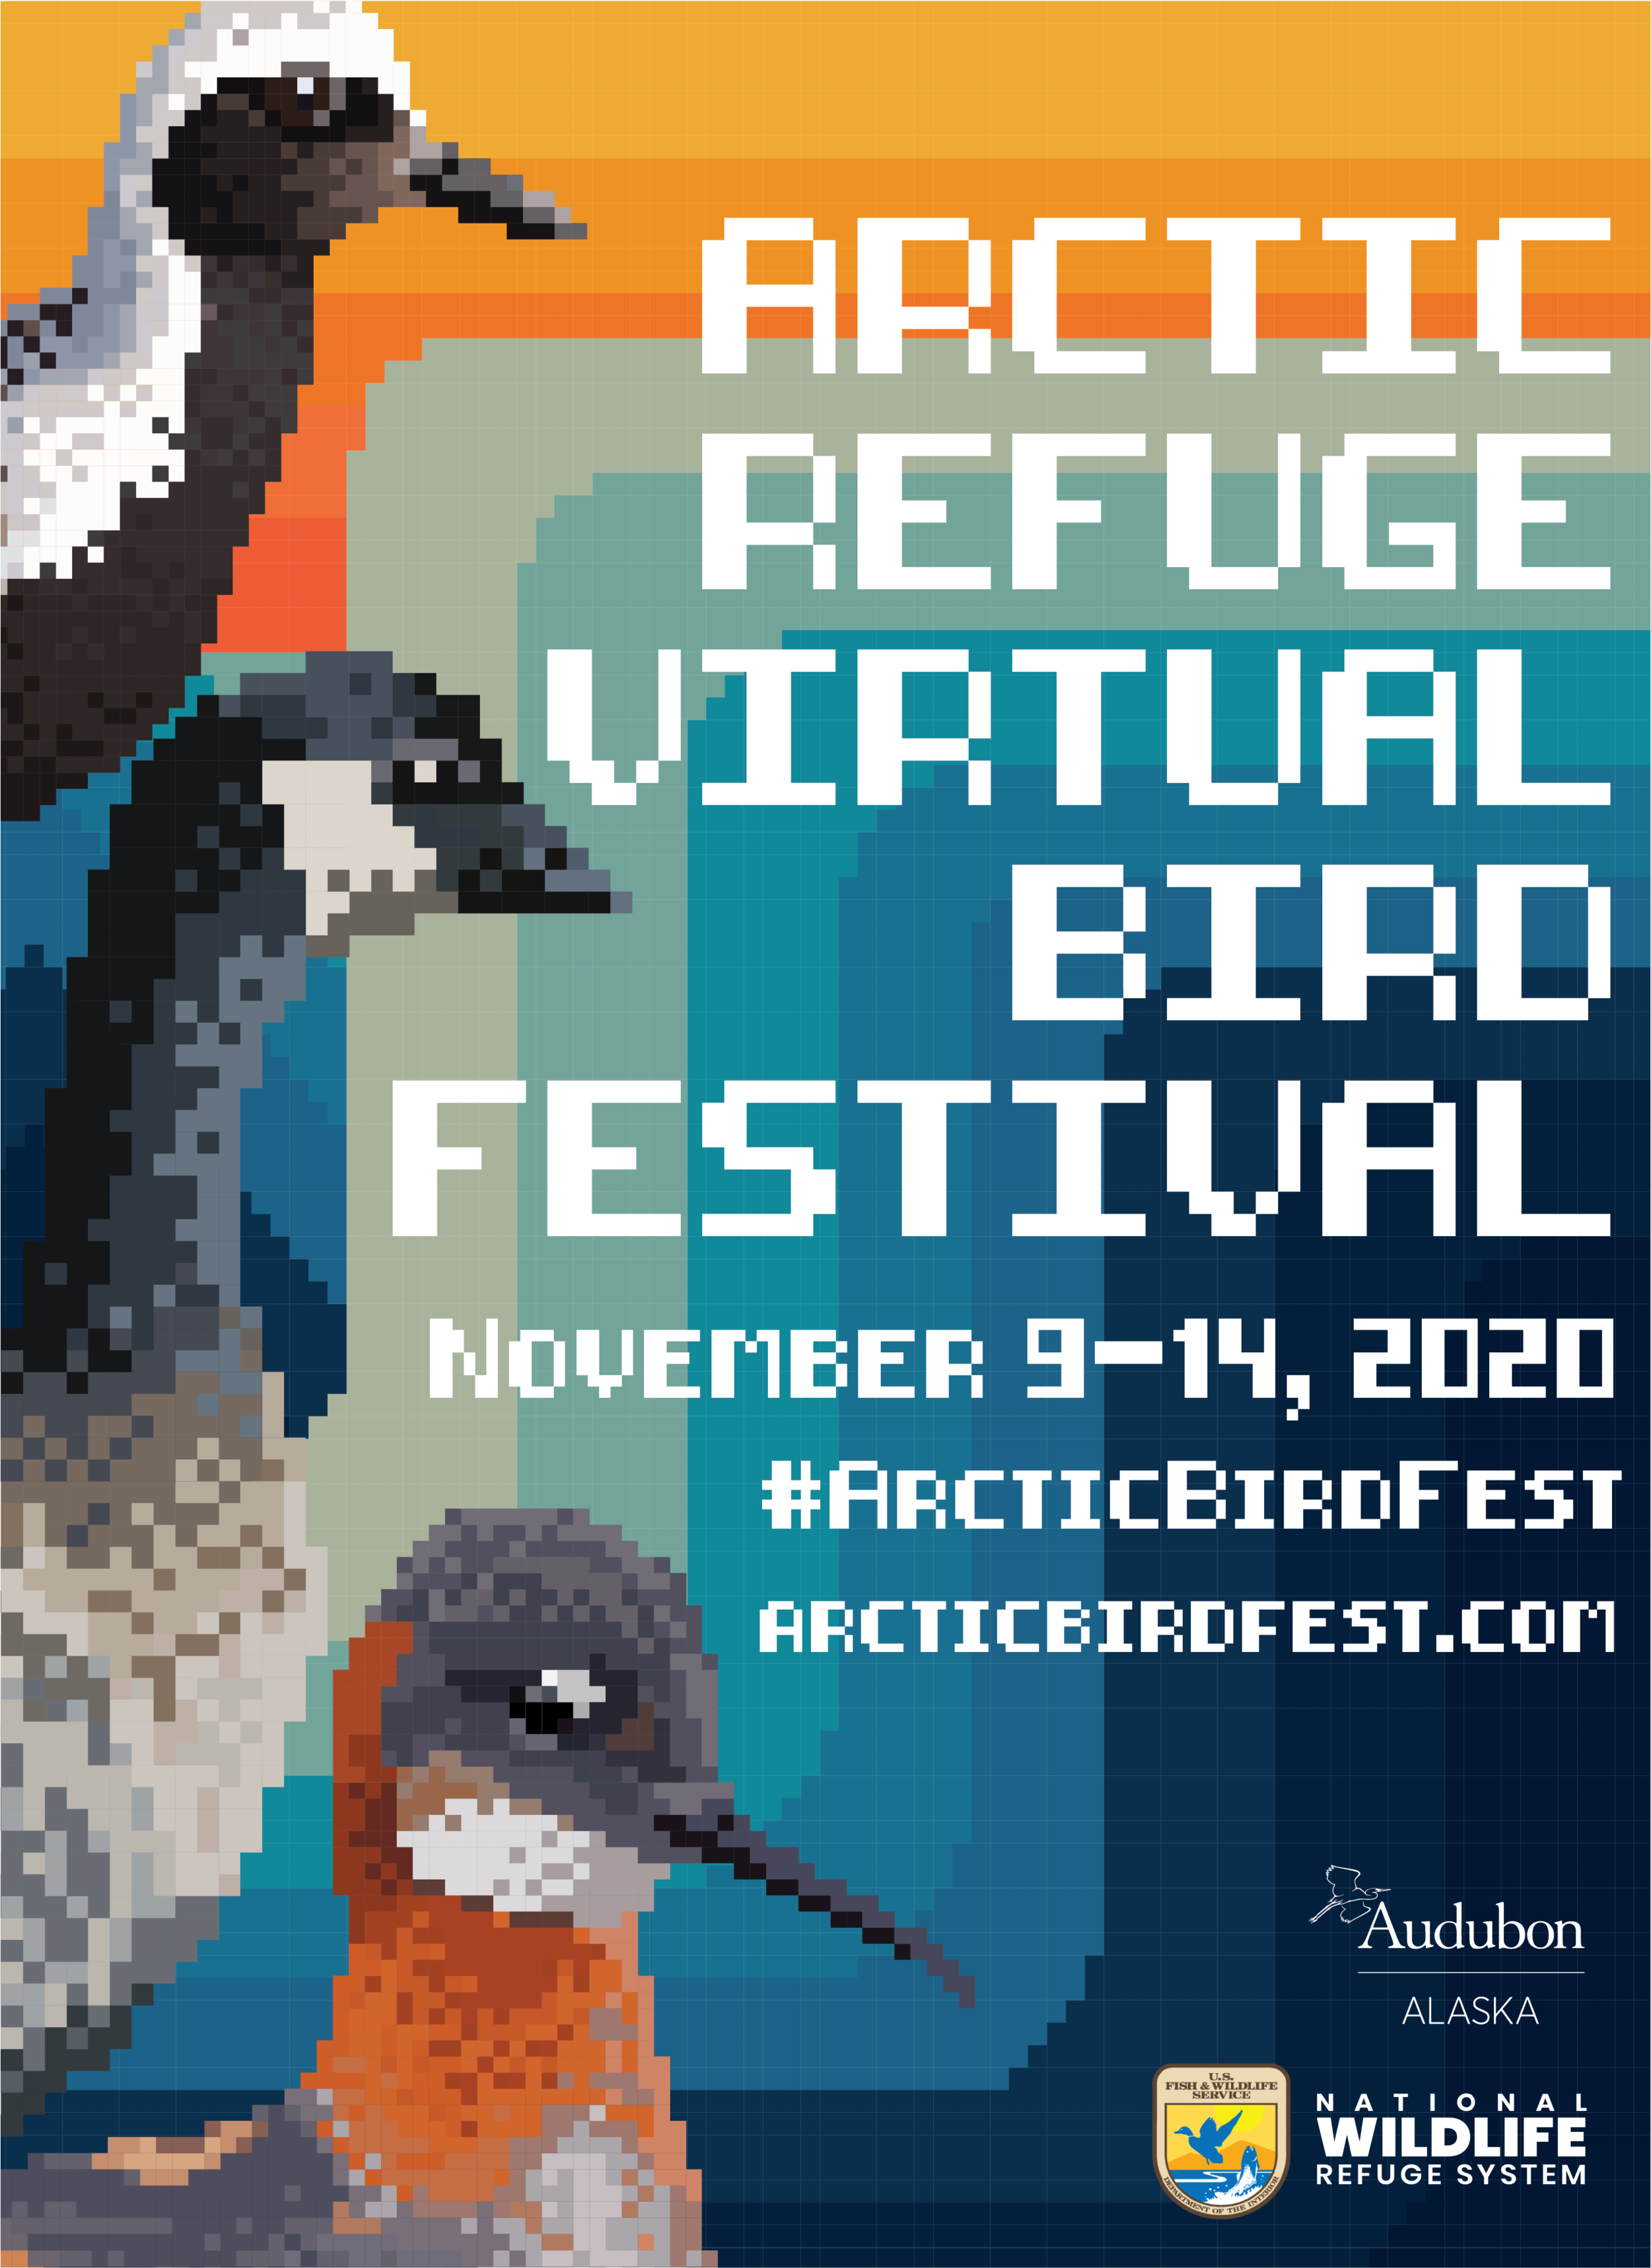 Arctic Birdfest 2020 Flyer Cropped.png